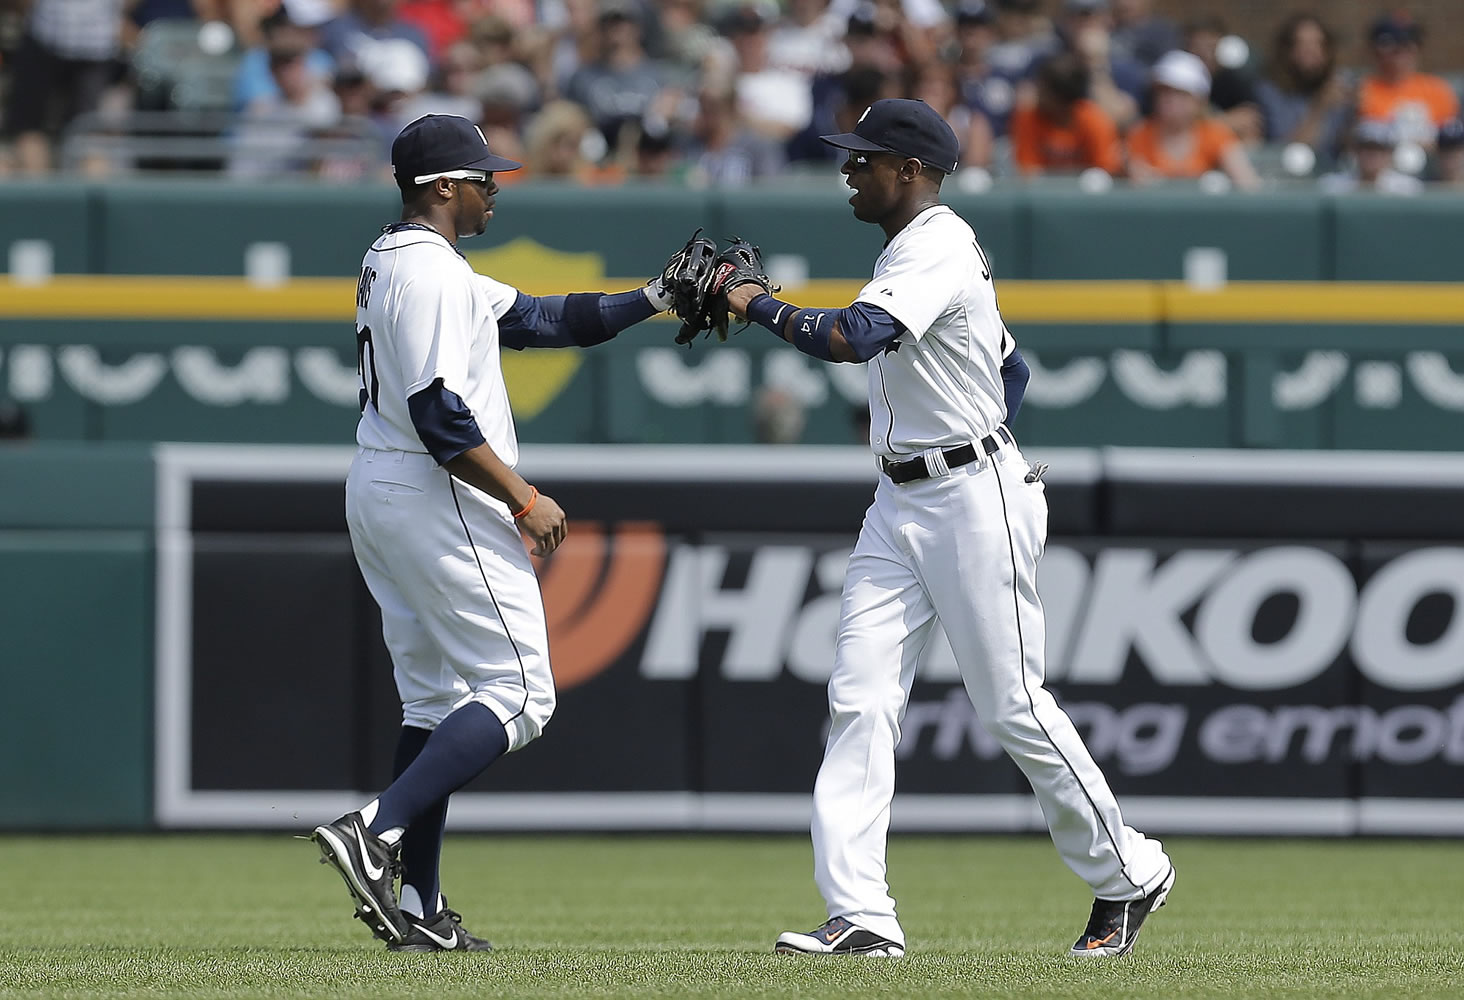 Detroit Tigers center fielder Austin Jackson, right, is replaced by Rajai Davis against the Chicago White Sox in the seventh inning Thursday after his acquisition by the Seattle Mariners was finalized.